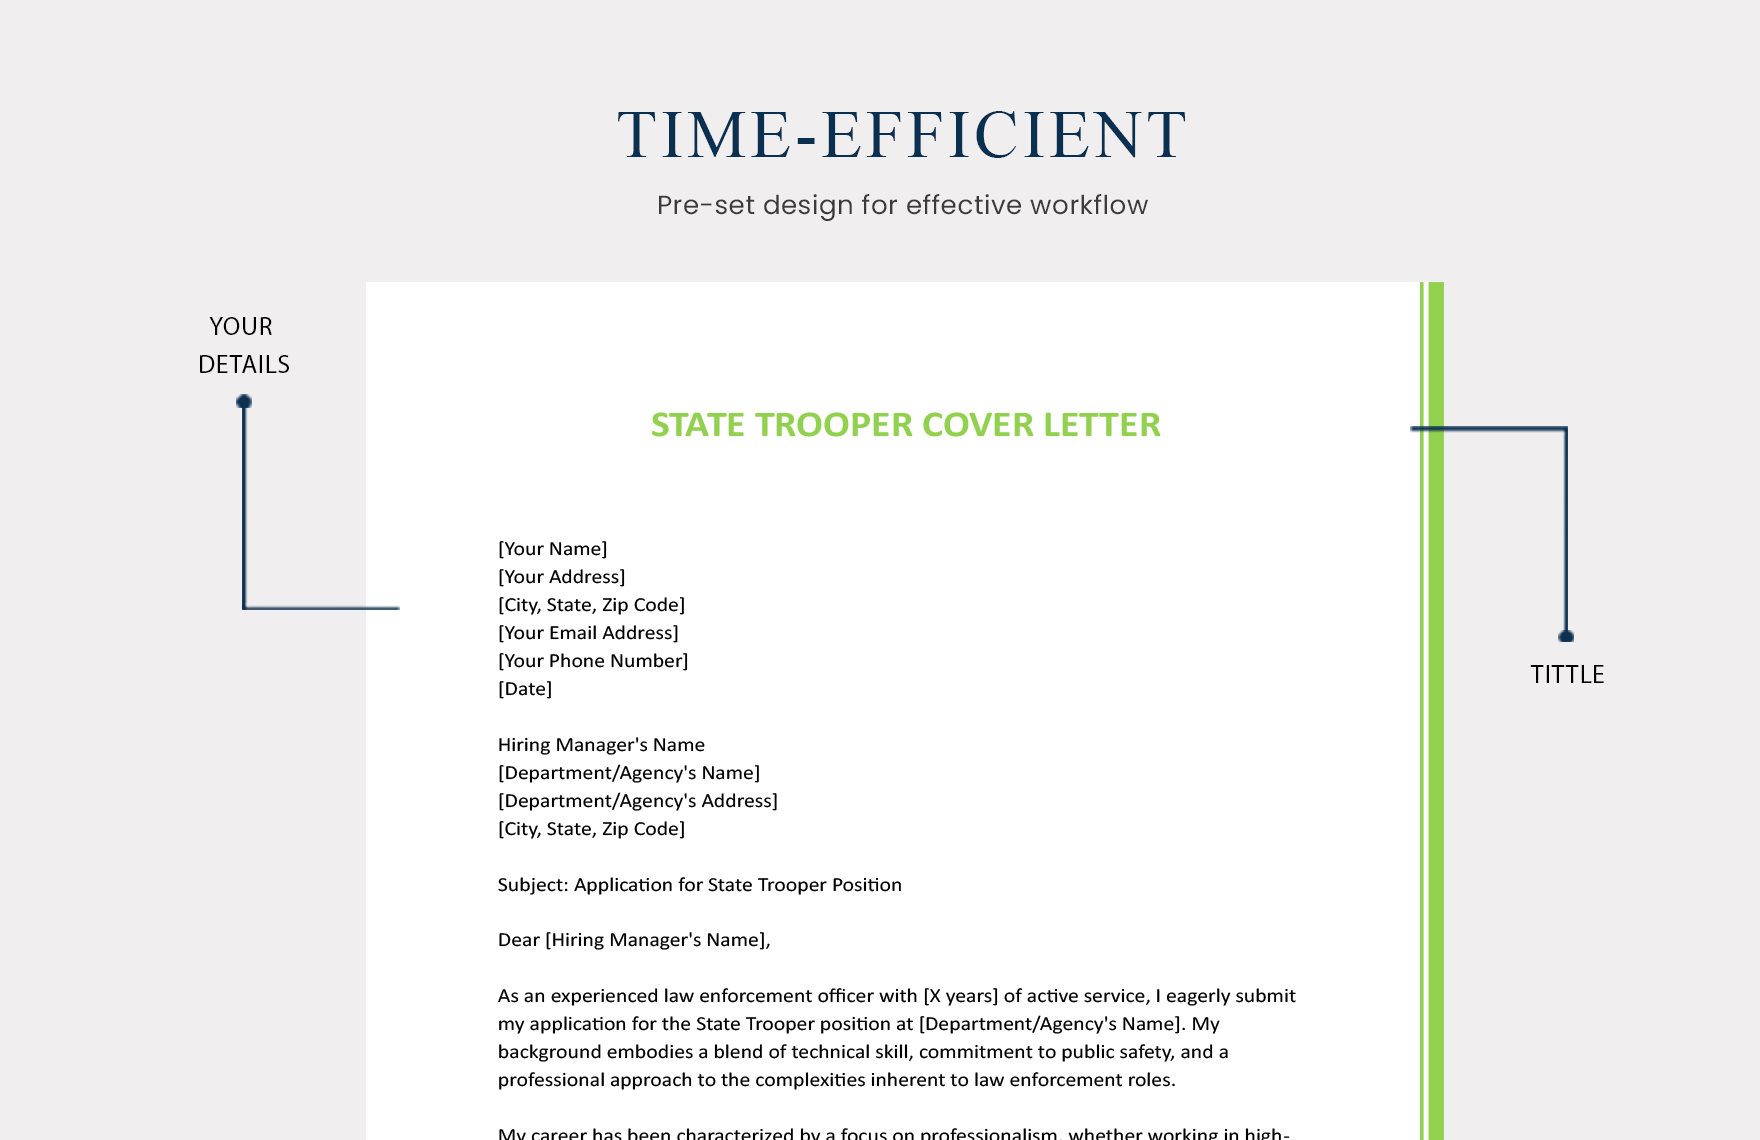 State Trooper Cover Letter